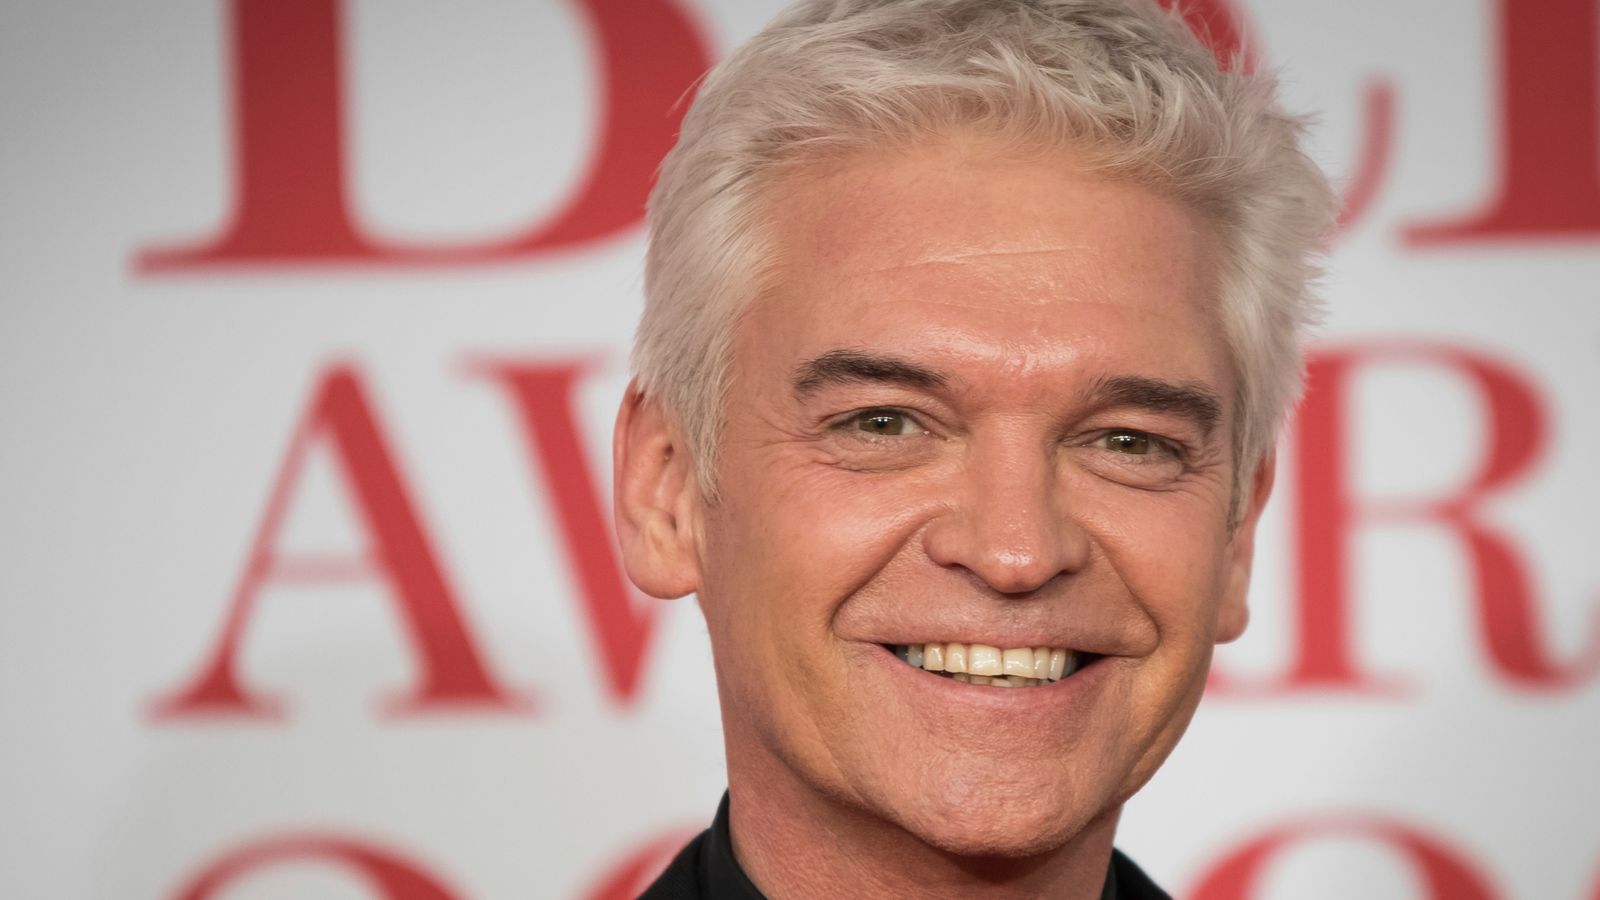 This Morning to return today after Phillip Schofield controversy - with Alison Hammond and Dermot O'Leary as presenters